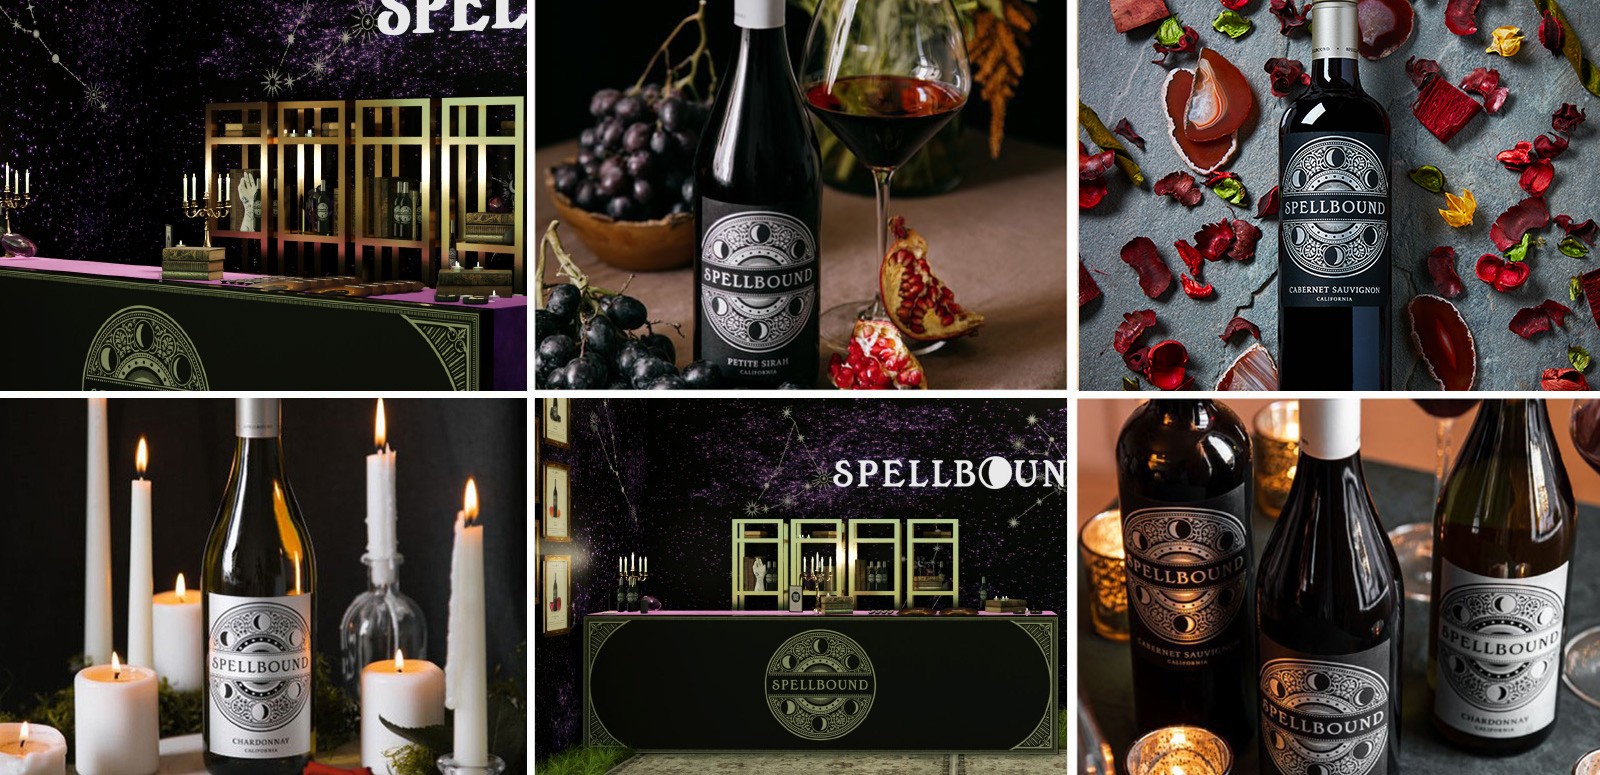 Spellbound's booth at the Austin Food & Wine Festival